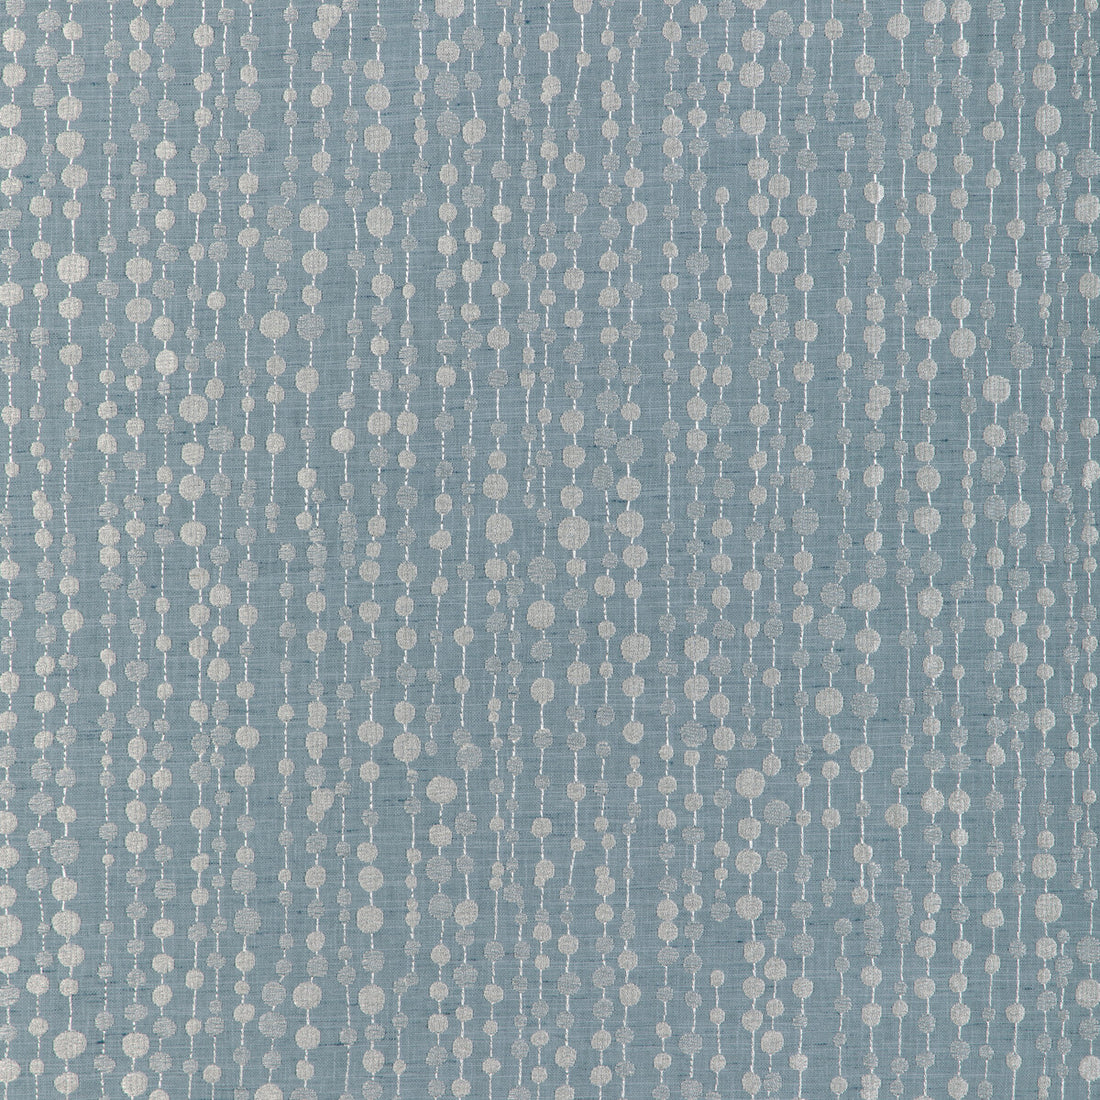 String Dot fabric in chambray color - pattern 36953.5.0 - by Kravet Basics in the Mid-Century Modern collection